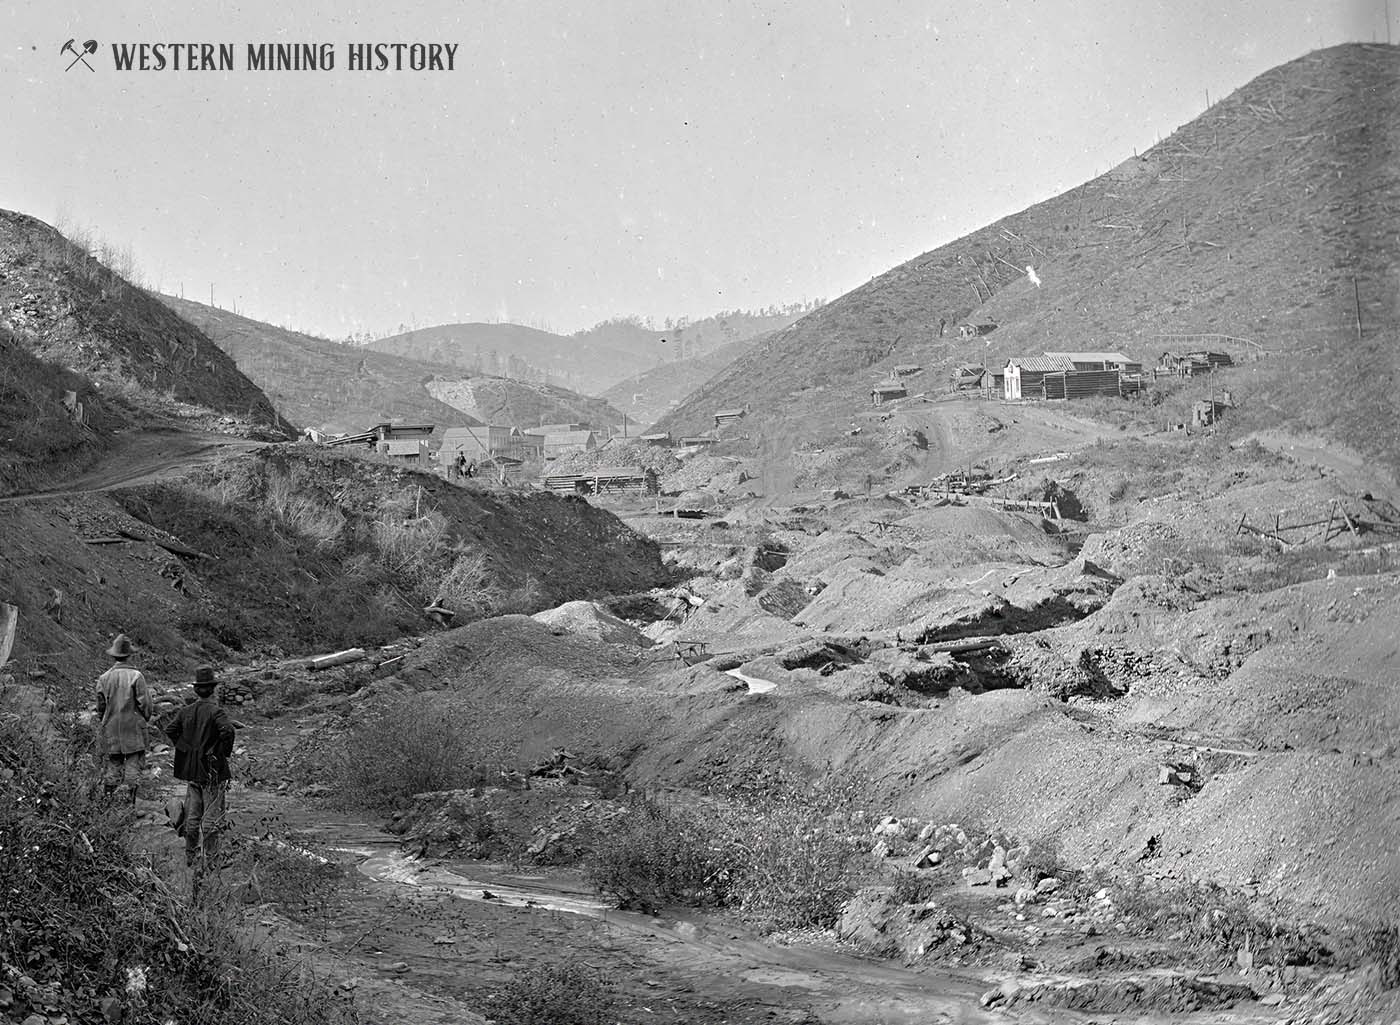 View of Deadwood area placer mines 1877